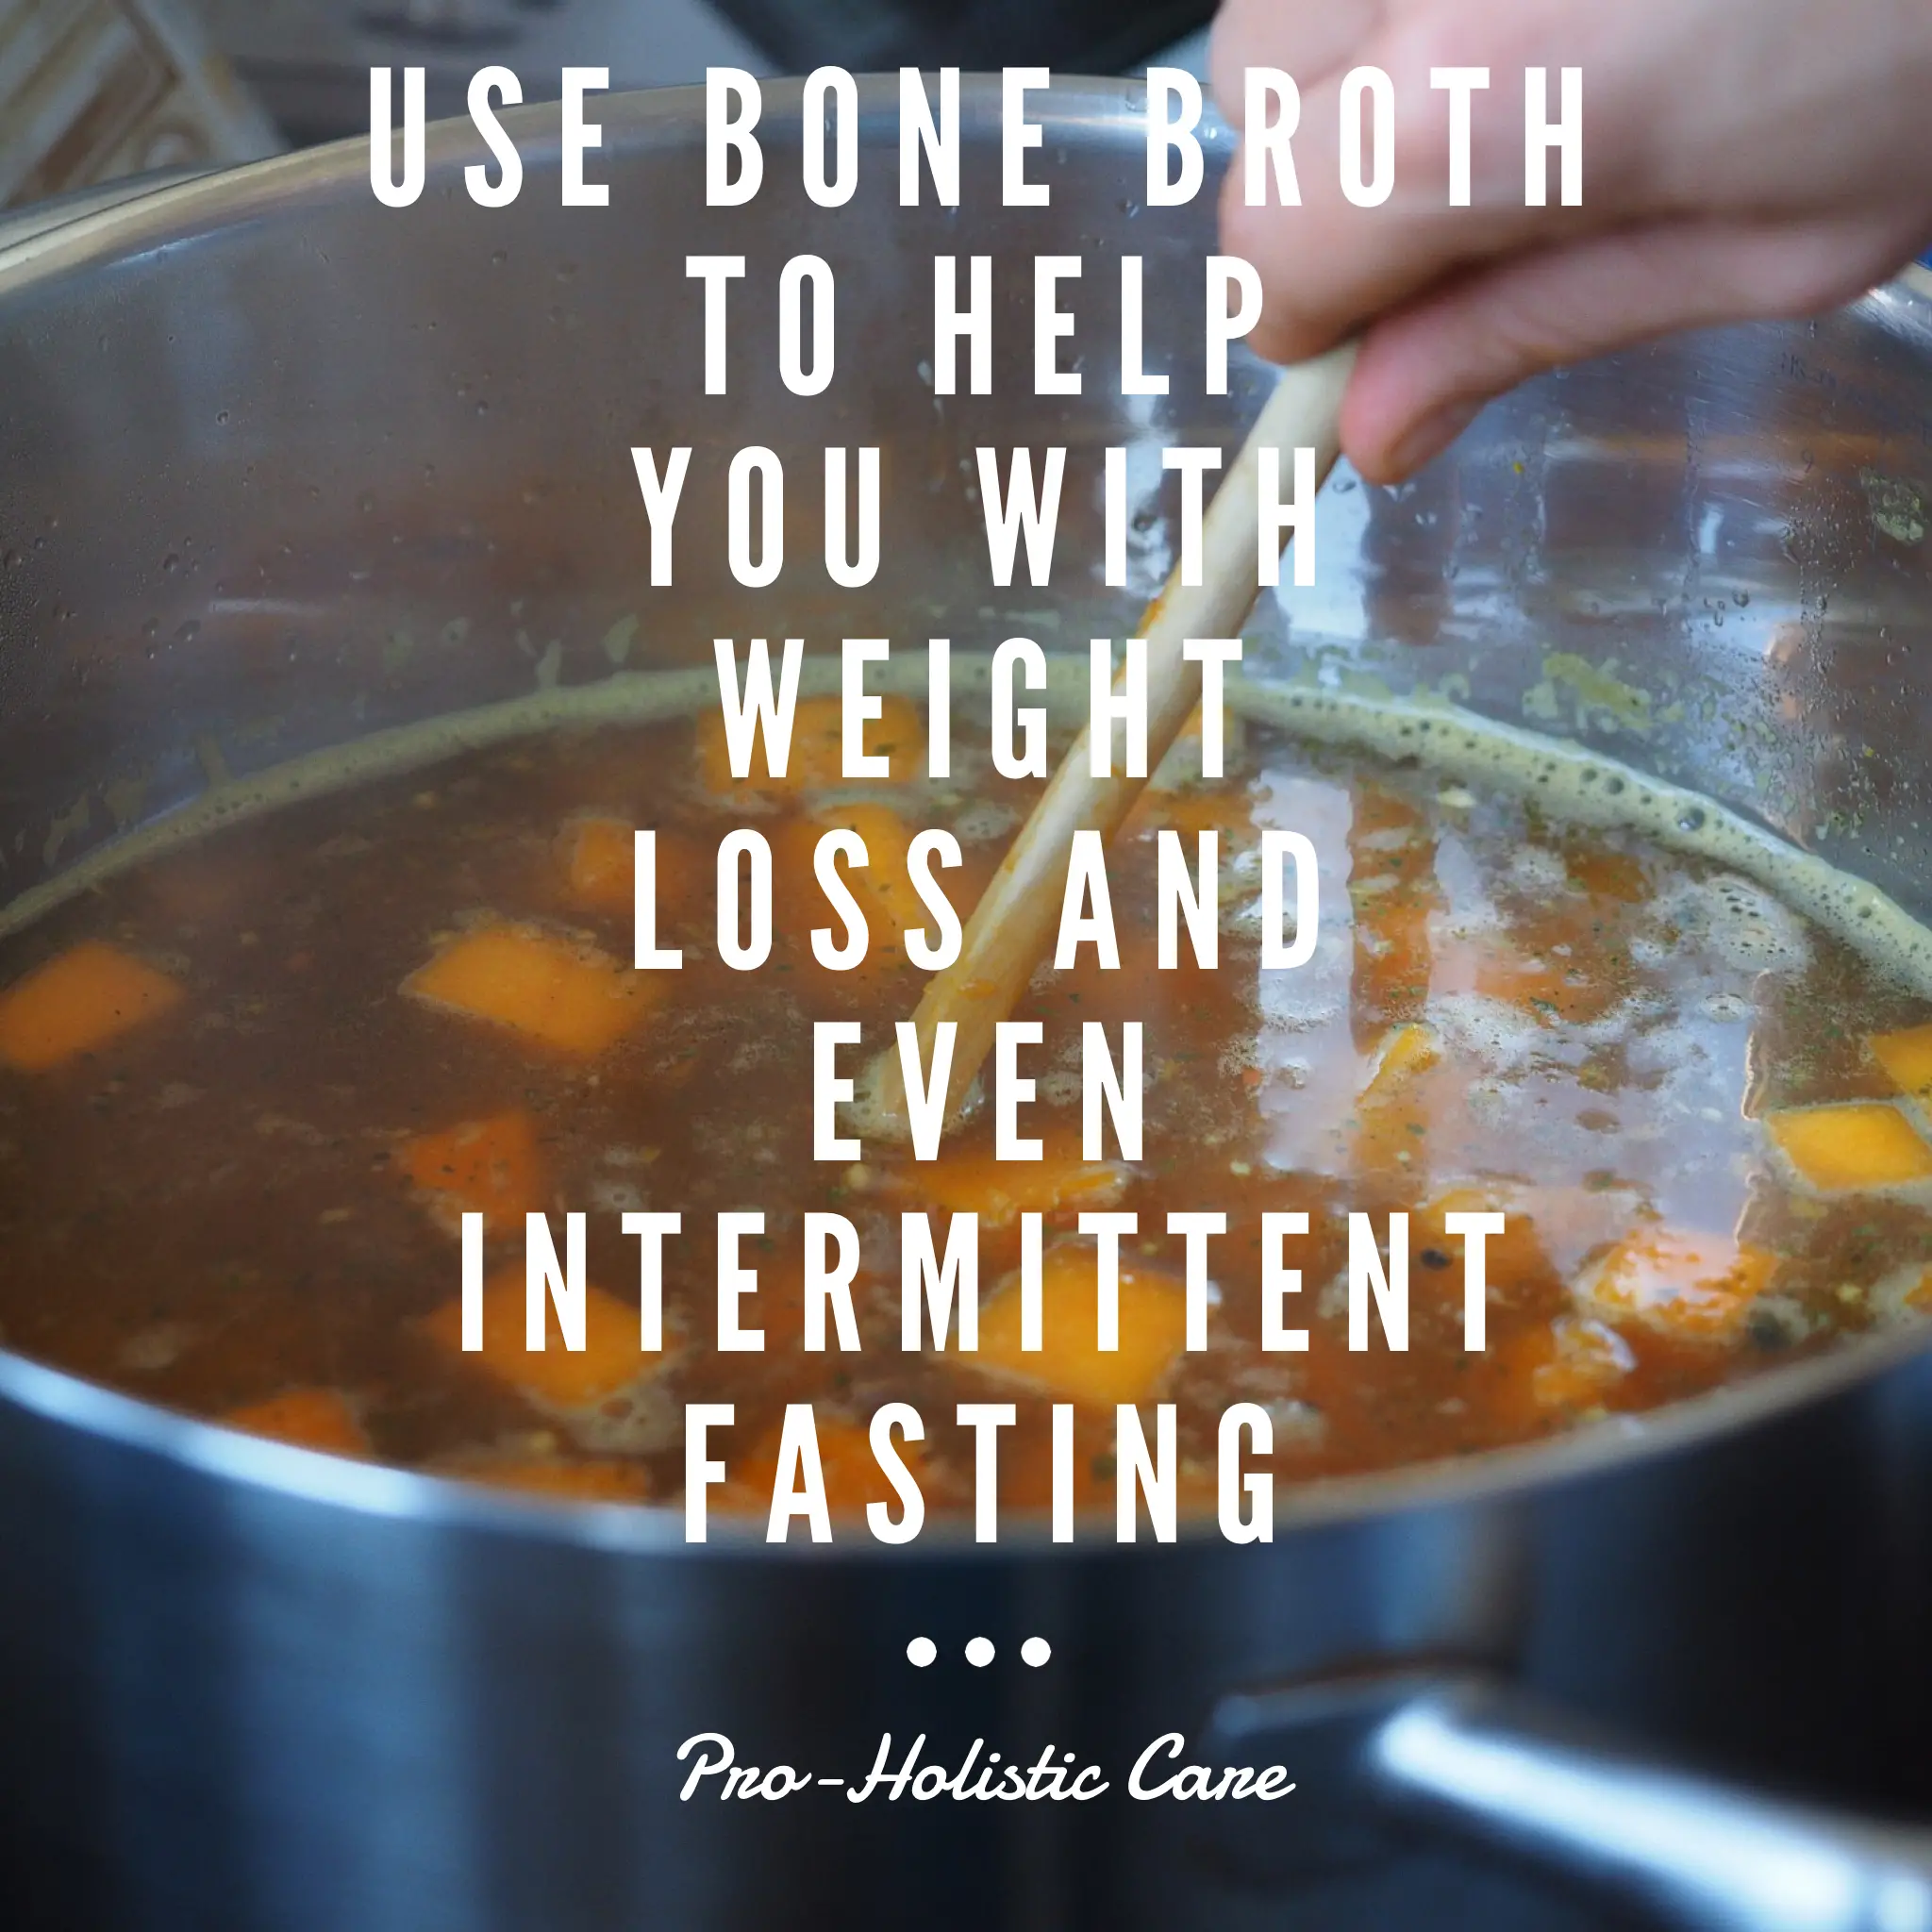 Bone Broth to help with Intermittent Fasting?